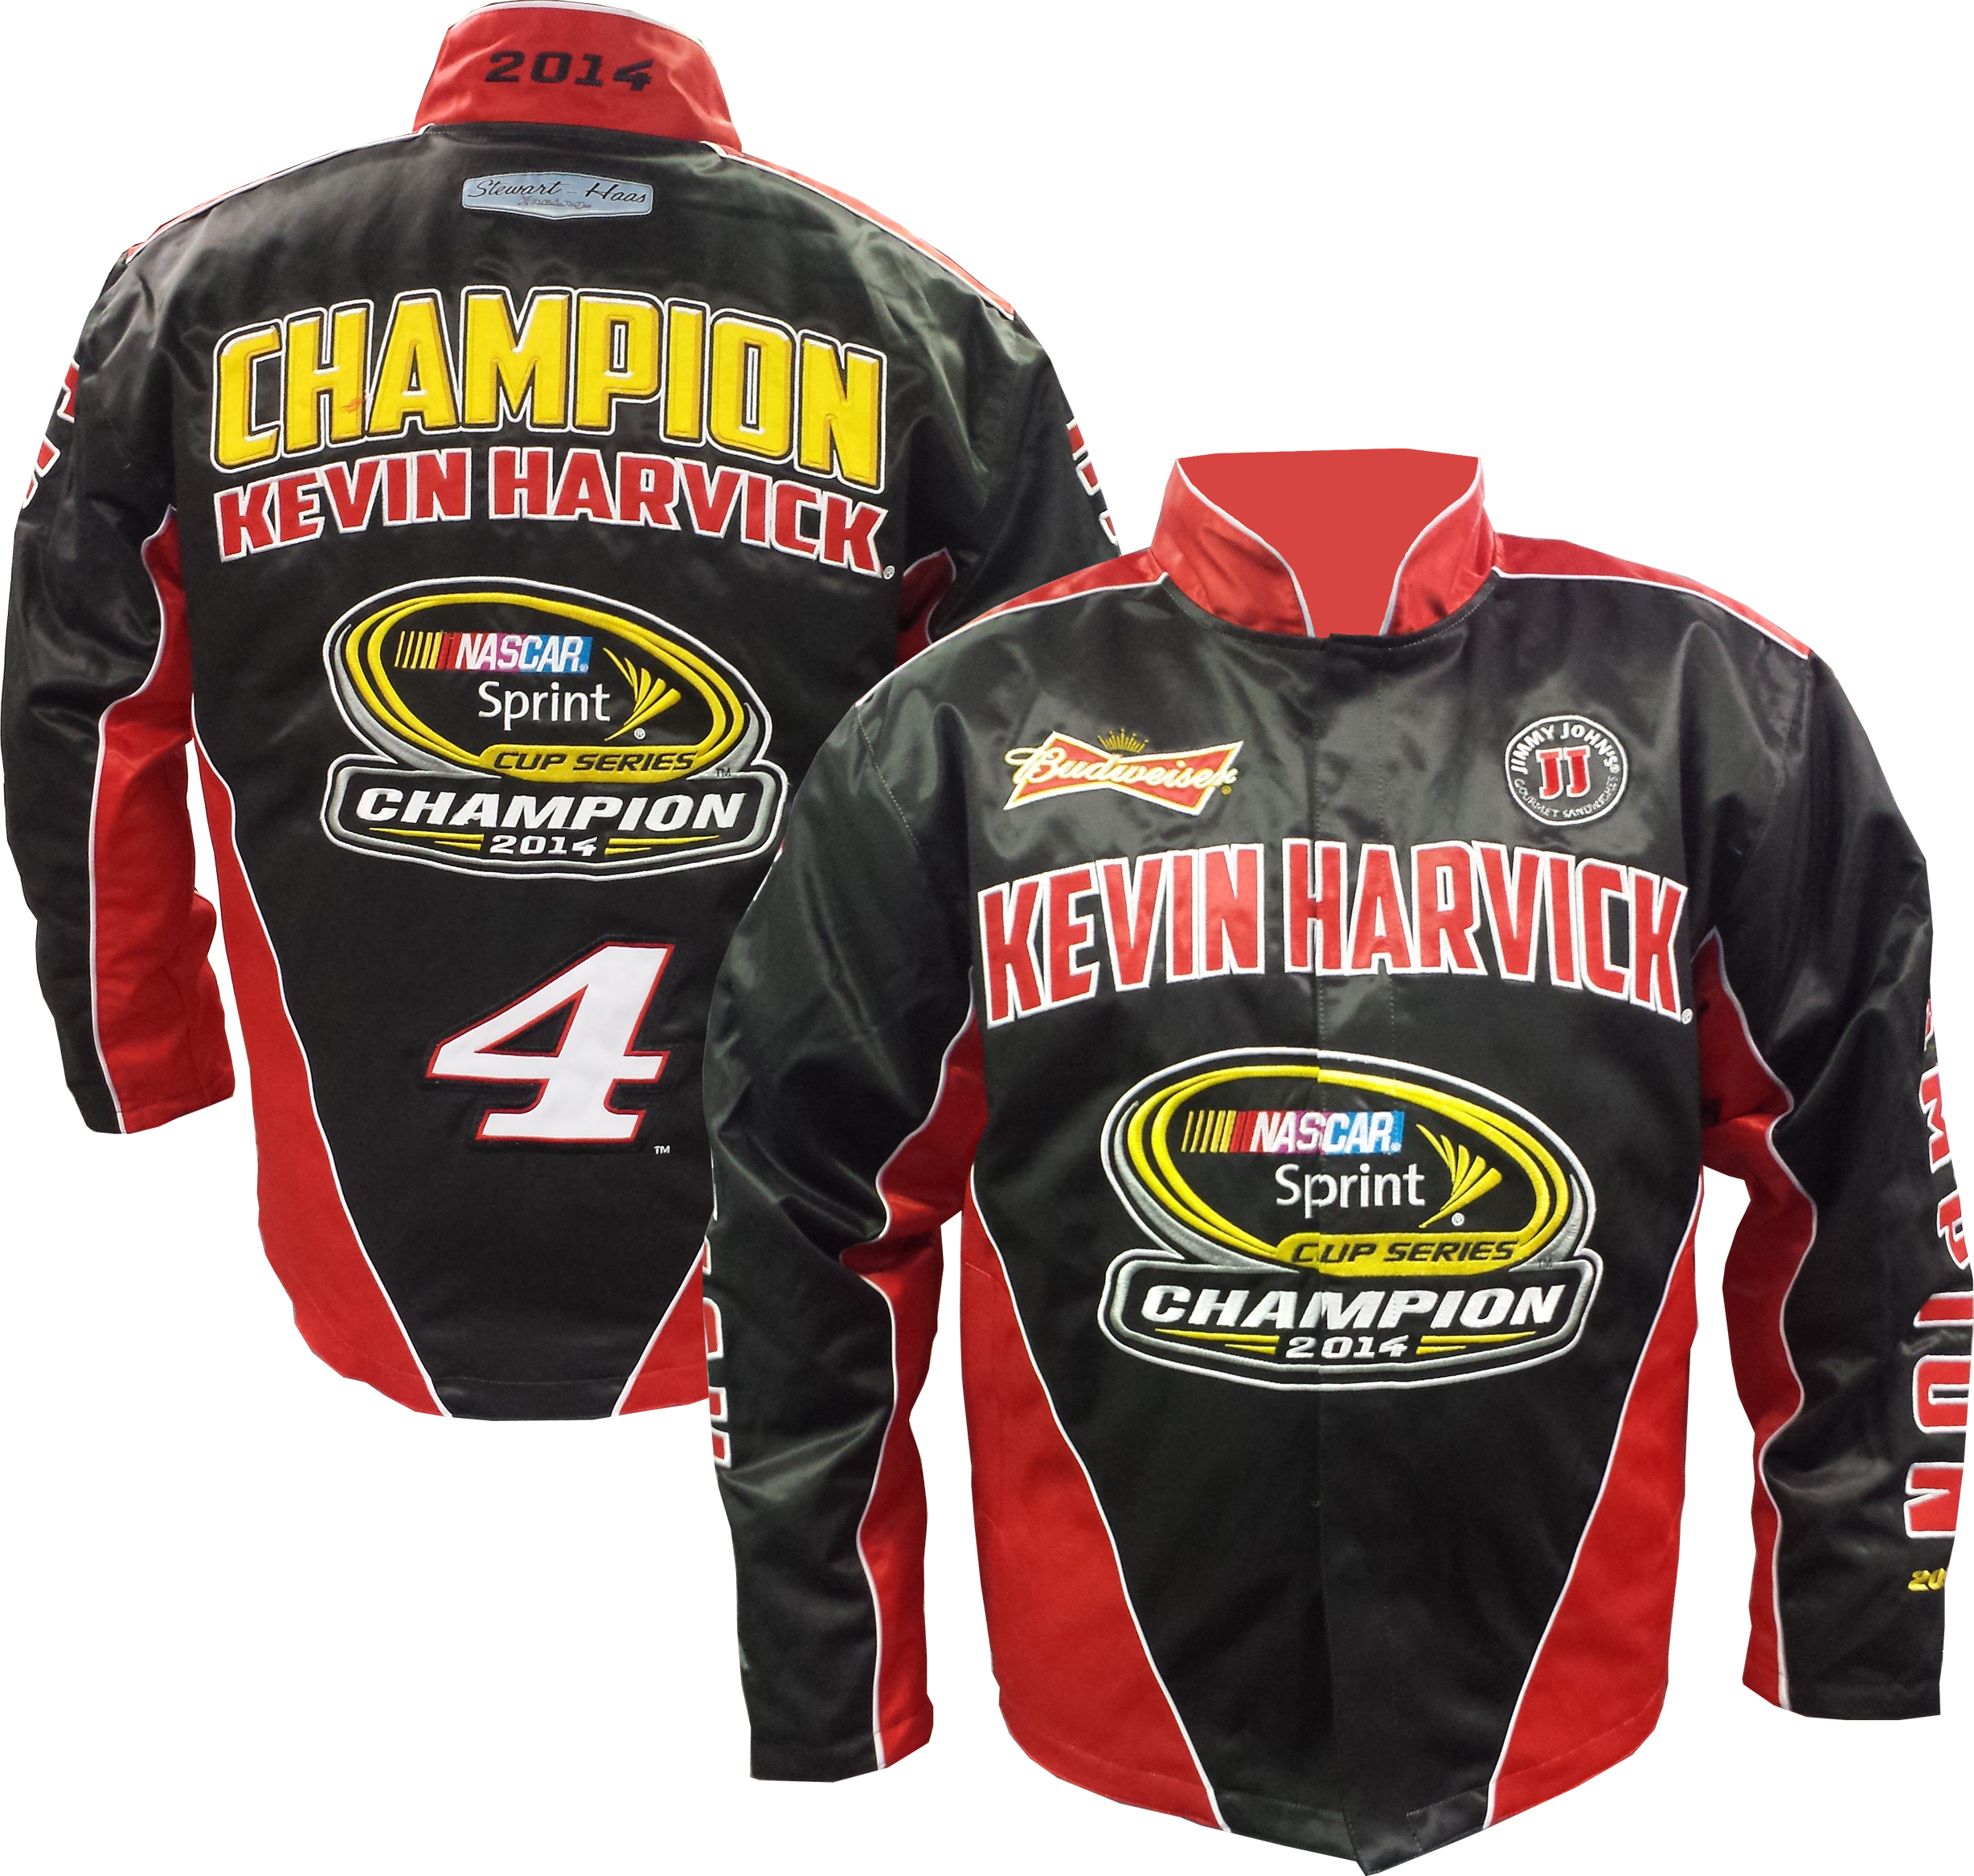 2014 Kevin Harvick Budweiser "Sprint Cup Champion" Jacket by Chase